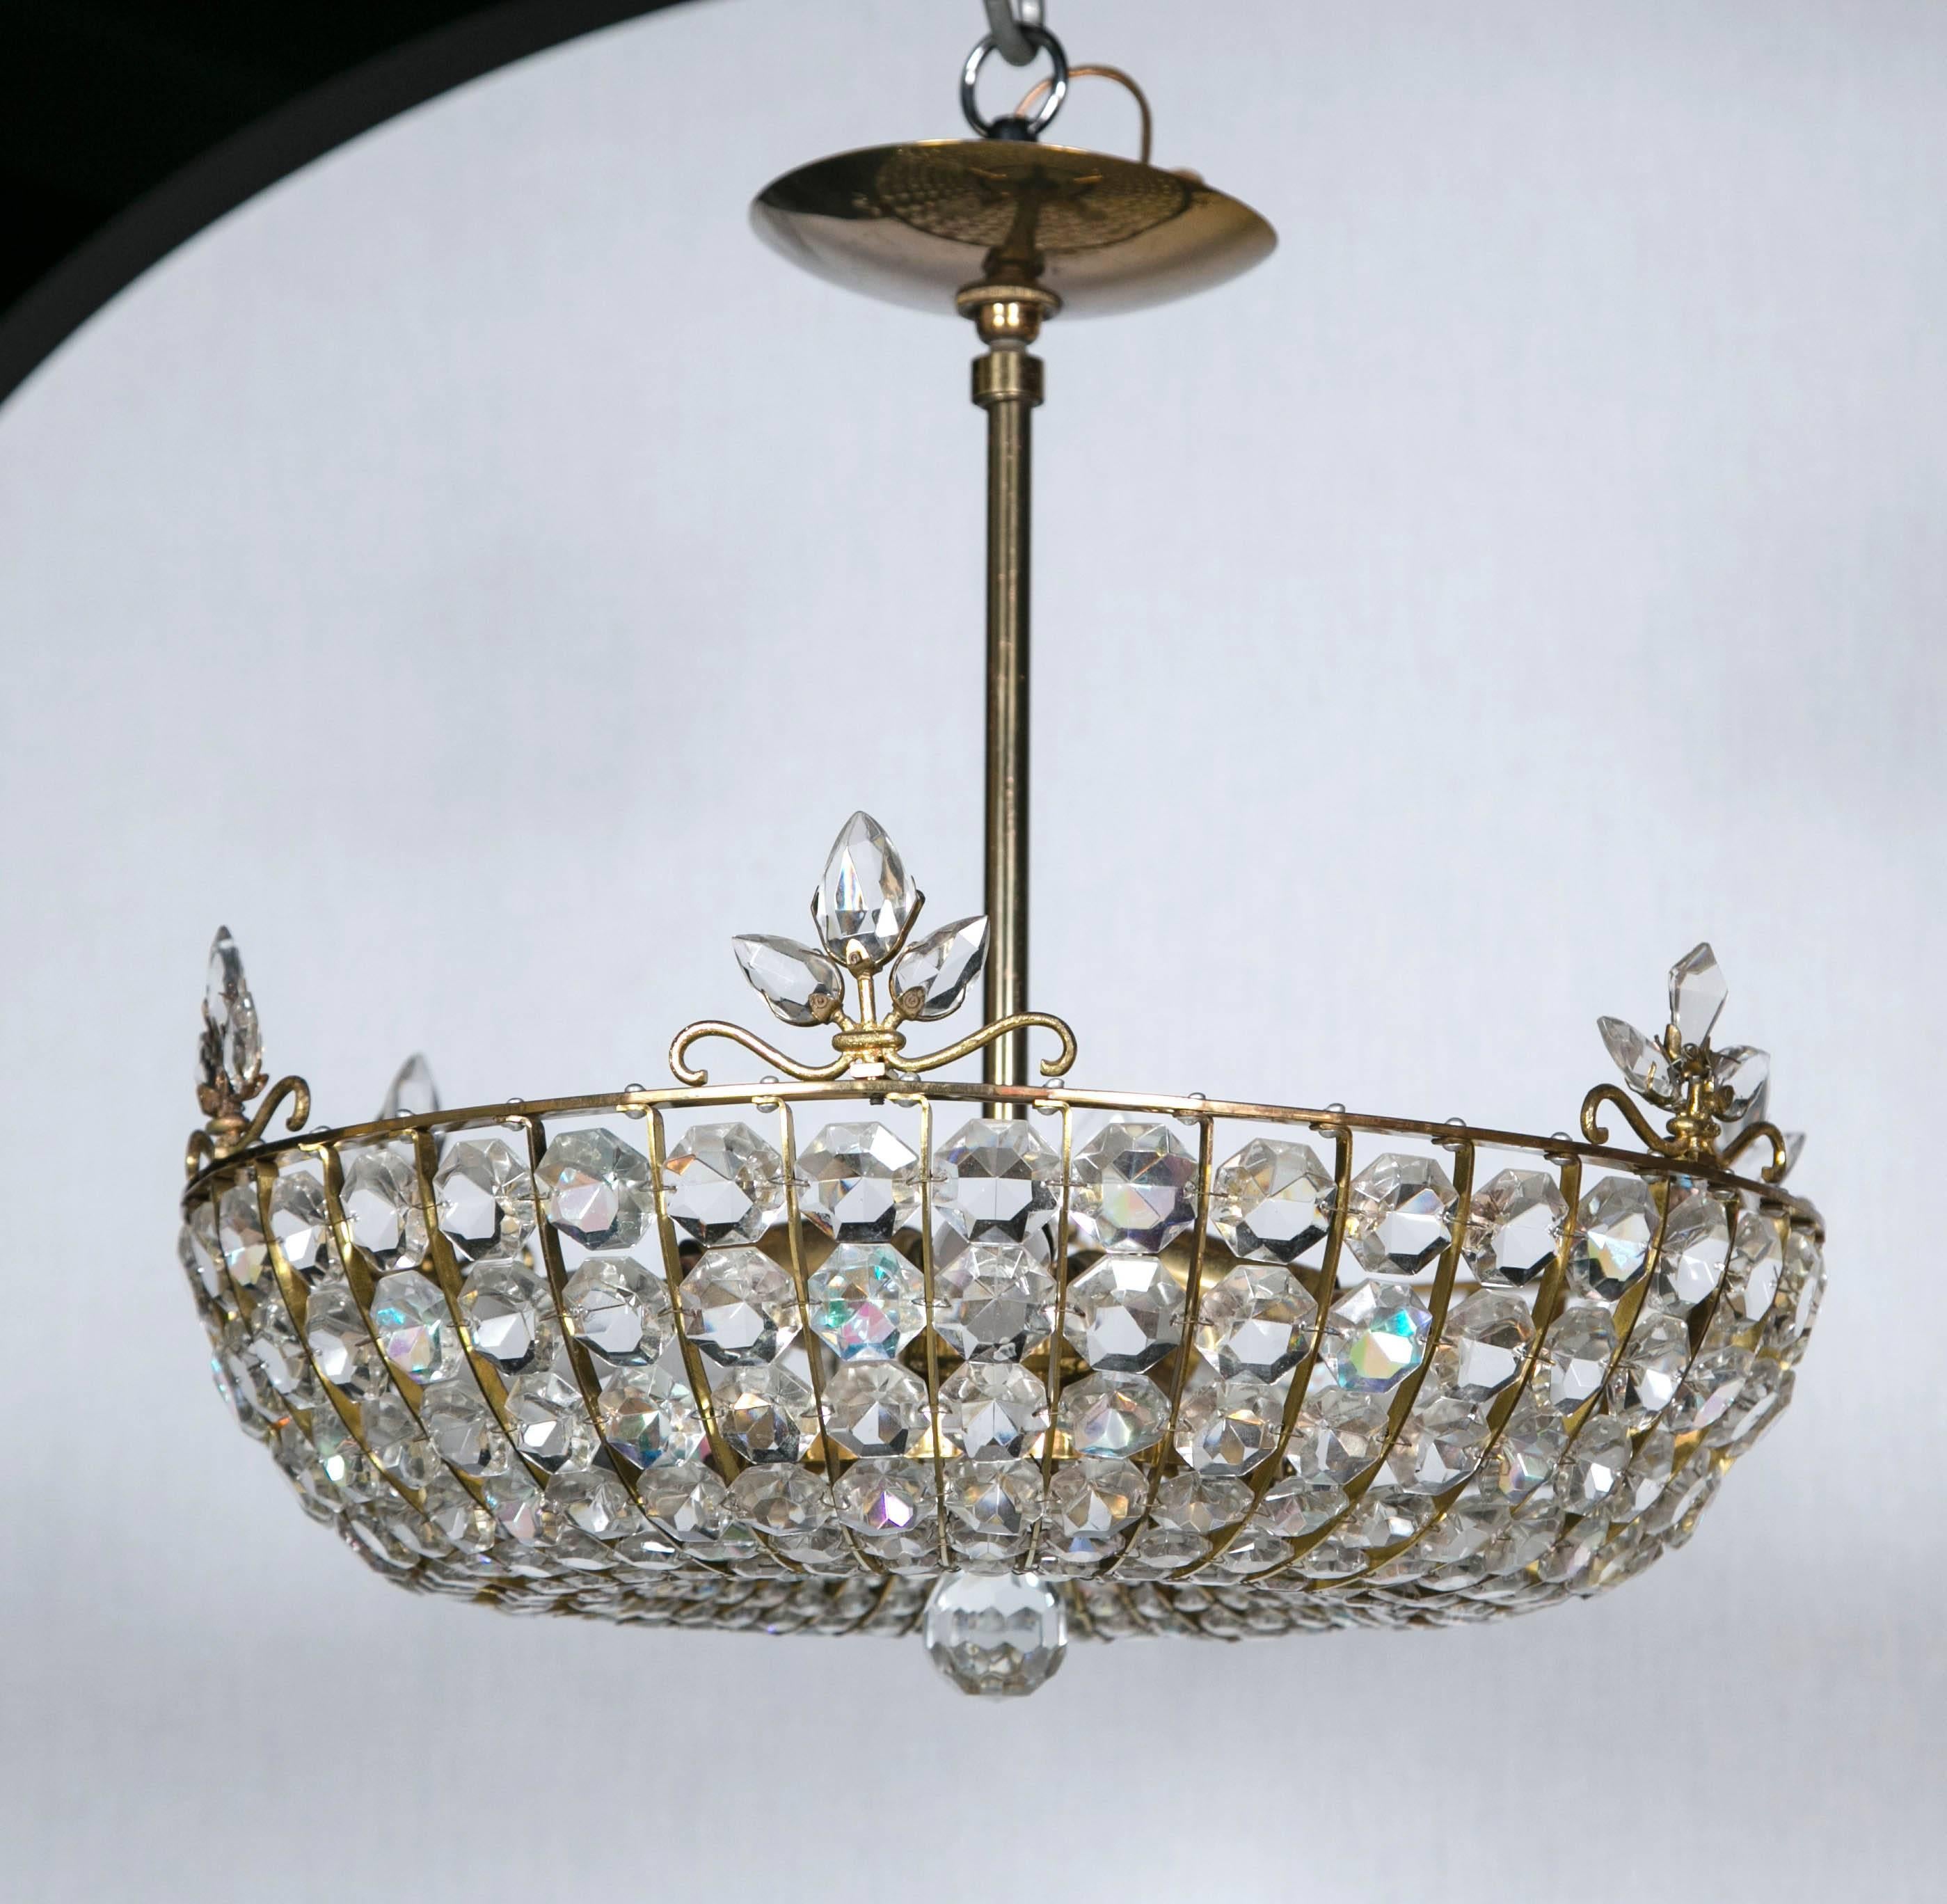 French Beaded Crystal Light Fixture In Excellent Condition For Sale In Stamford, CT